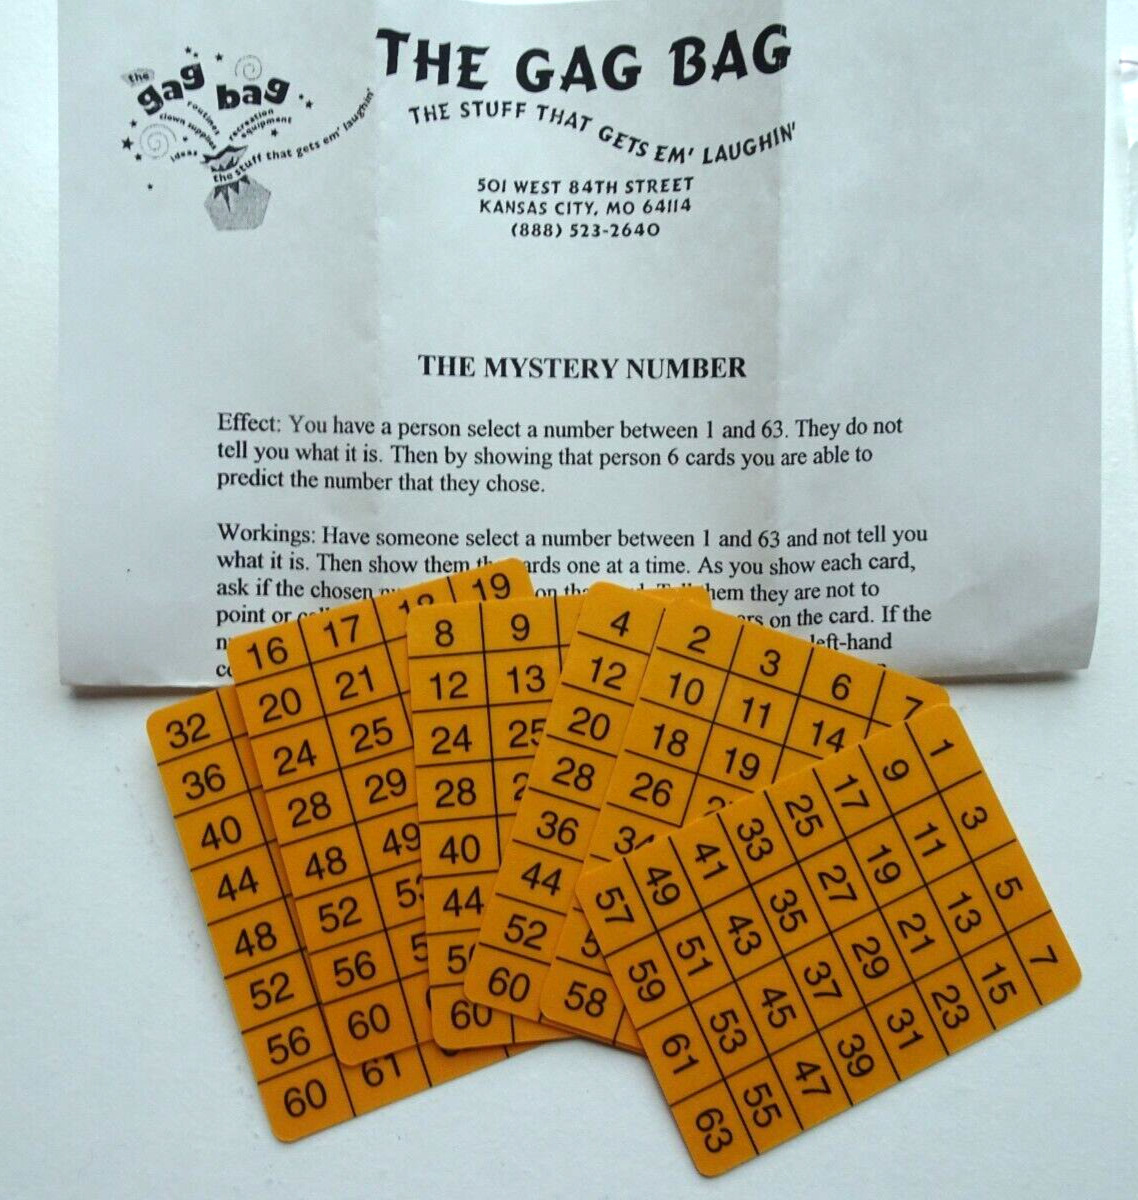 MAGIC - The MYSTERY Number by the GAG BAG Laminated w/instructions